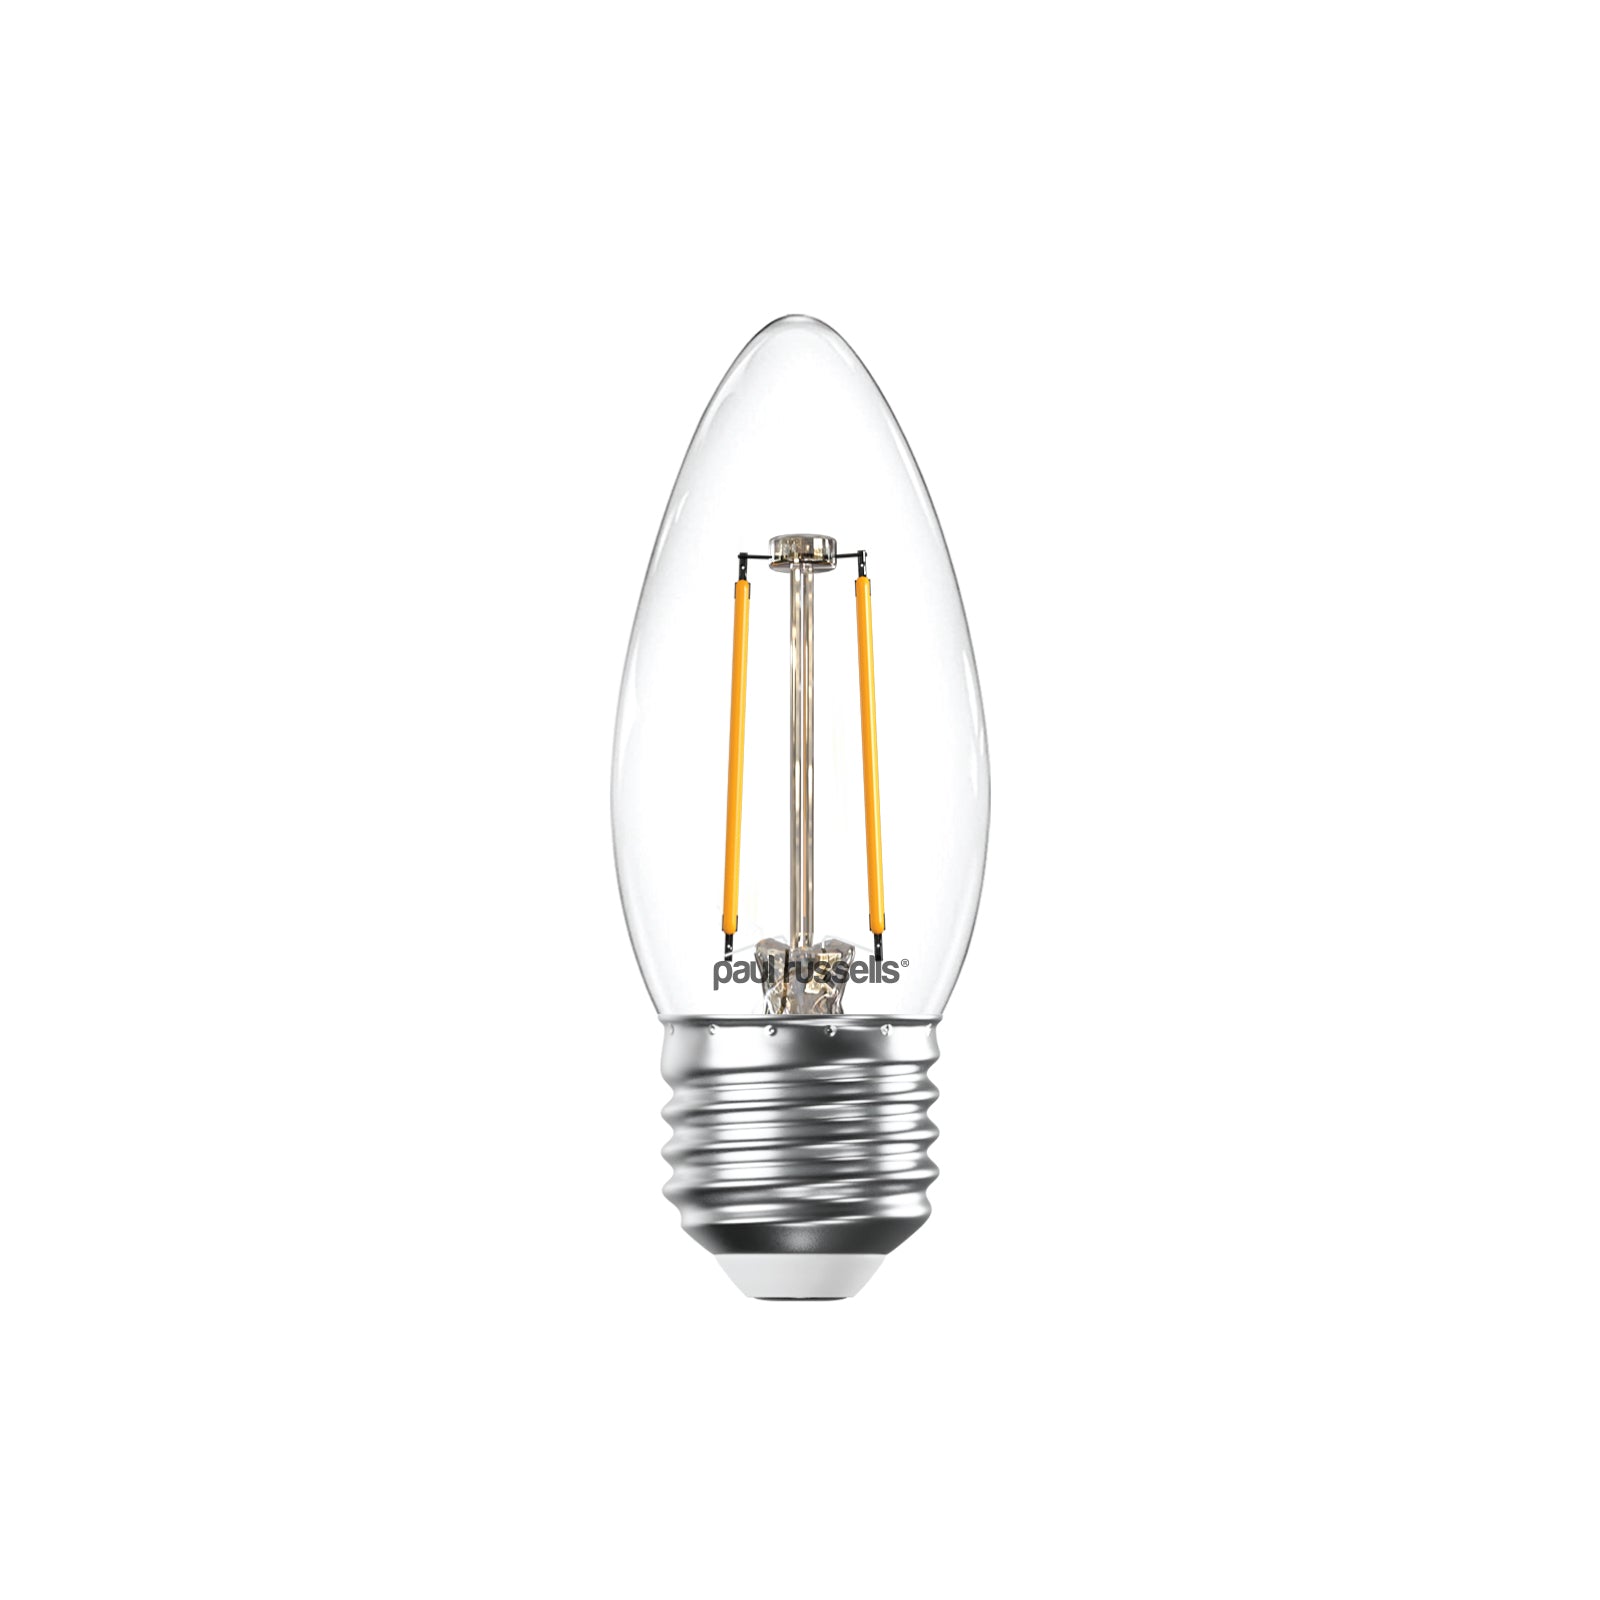 LED Candle Light Bulbs – Paul Russells Trade